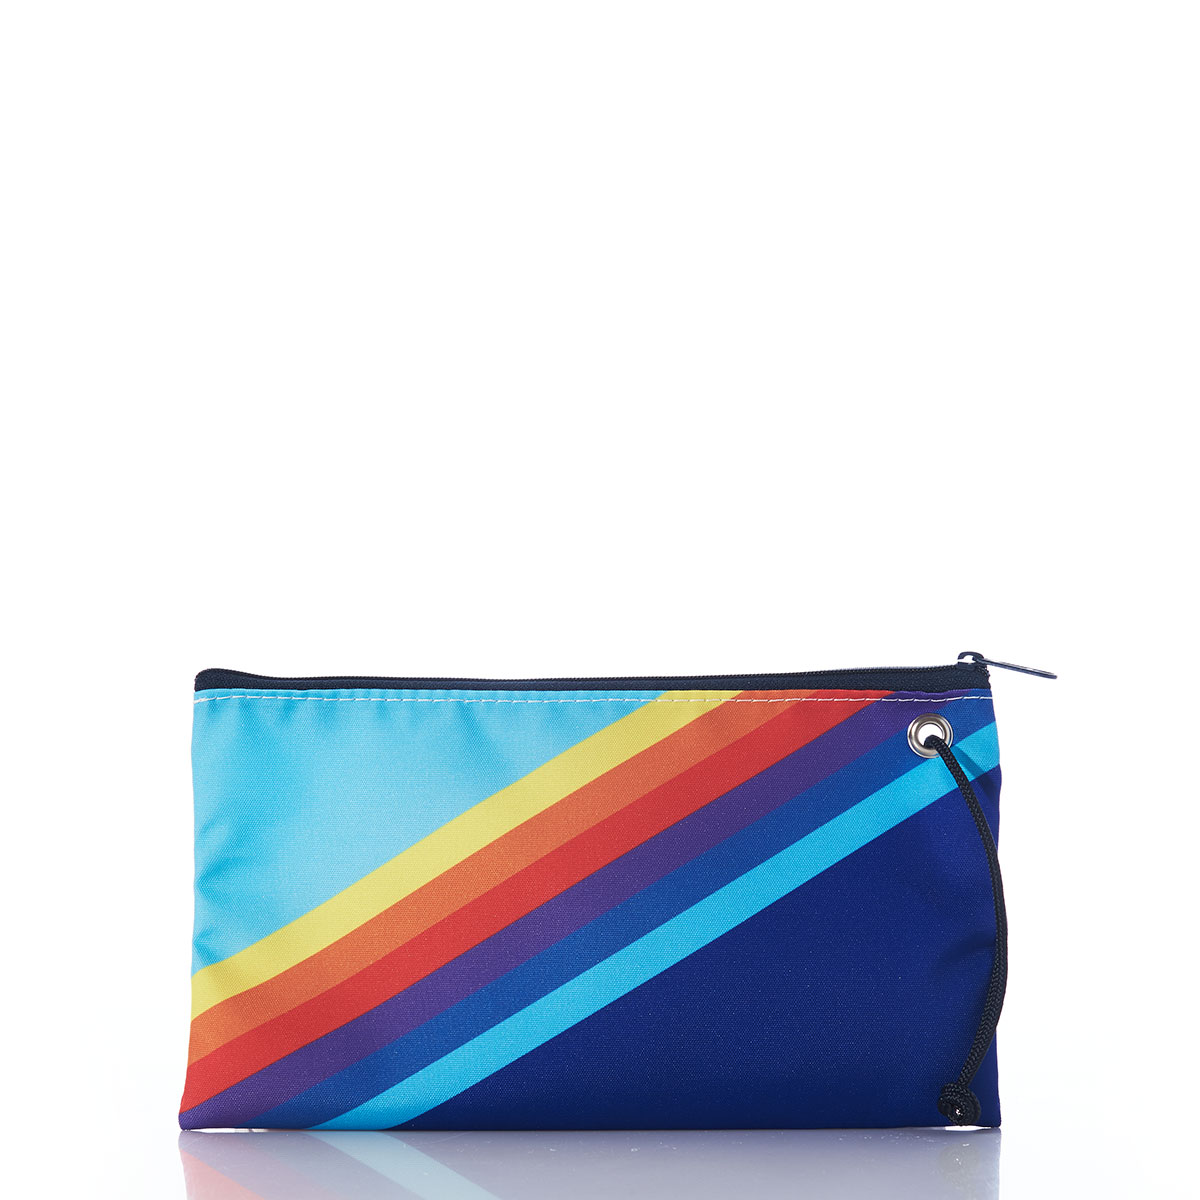 front view of a large wristlet is printed with retro stripes that range from light blue in the top left corner to dark blue in the bottom right corner, with rainbow colored stripes in between